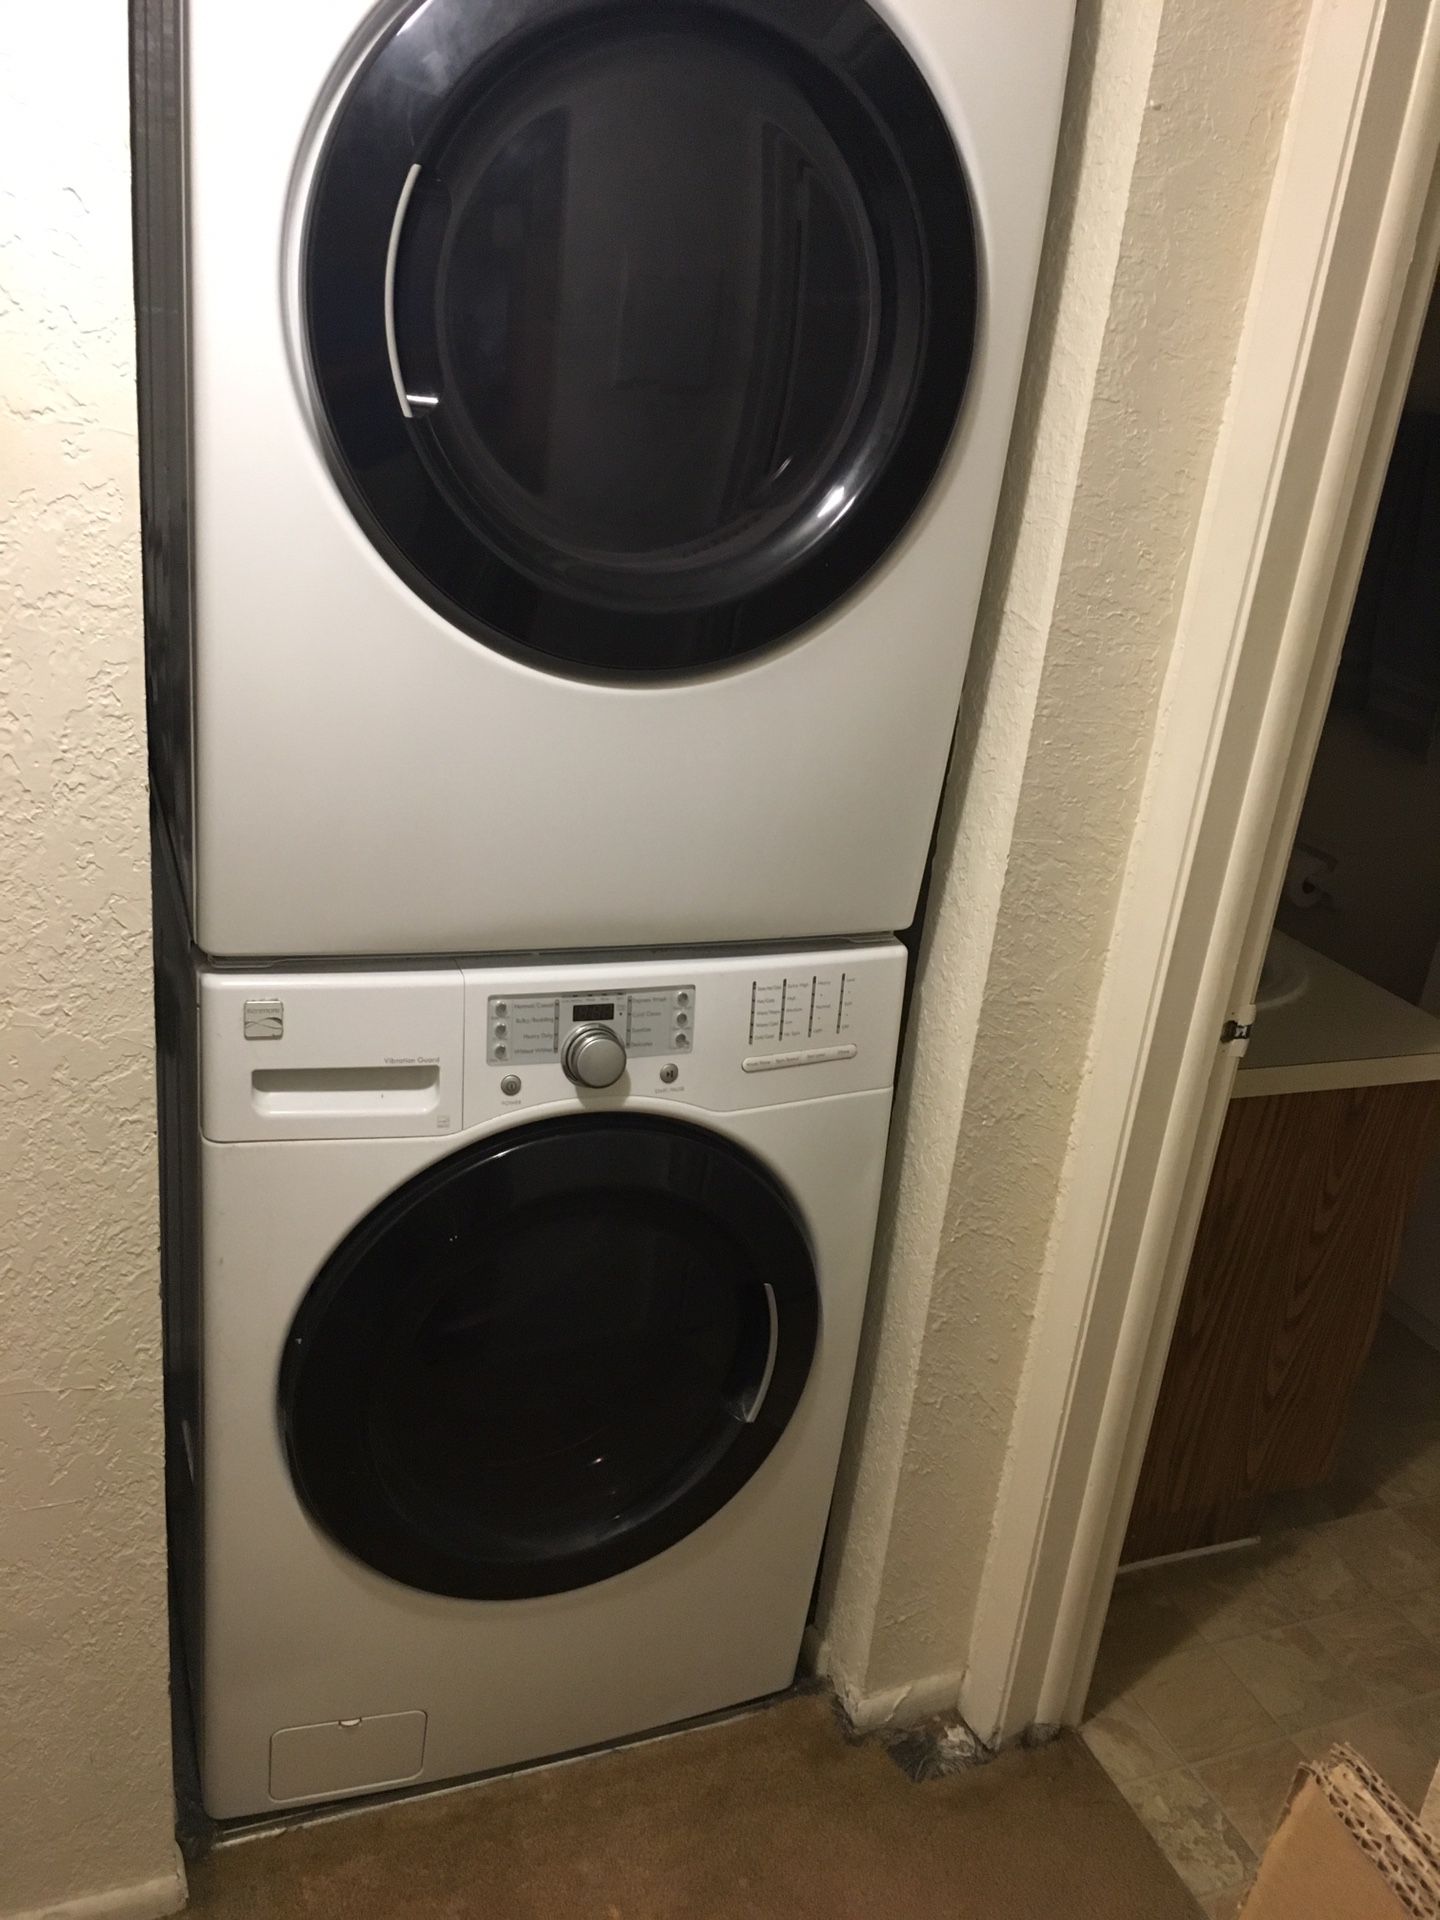 Kenmore full-size washer and dryer set front loading in excellent condition can be stackable or side-by-side comes with stacking kit we are moving no